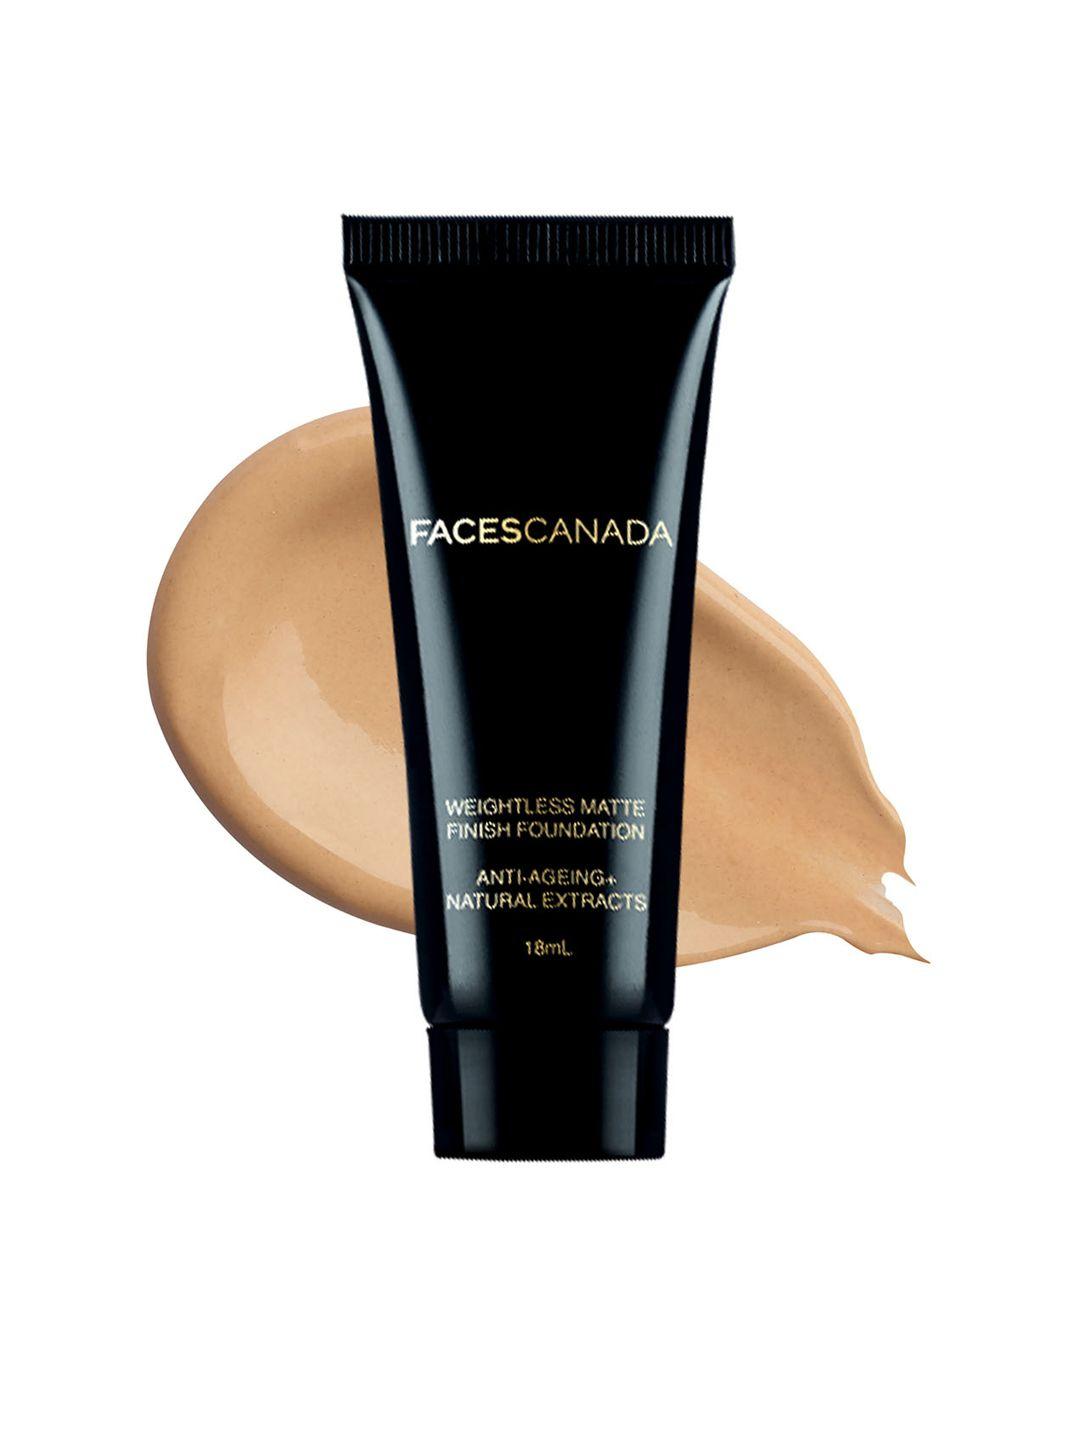 faces canada weightless matte foundation with grape extracts & shea butter 18ml - beige 03